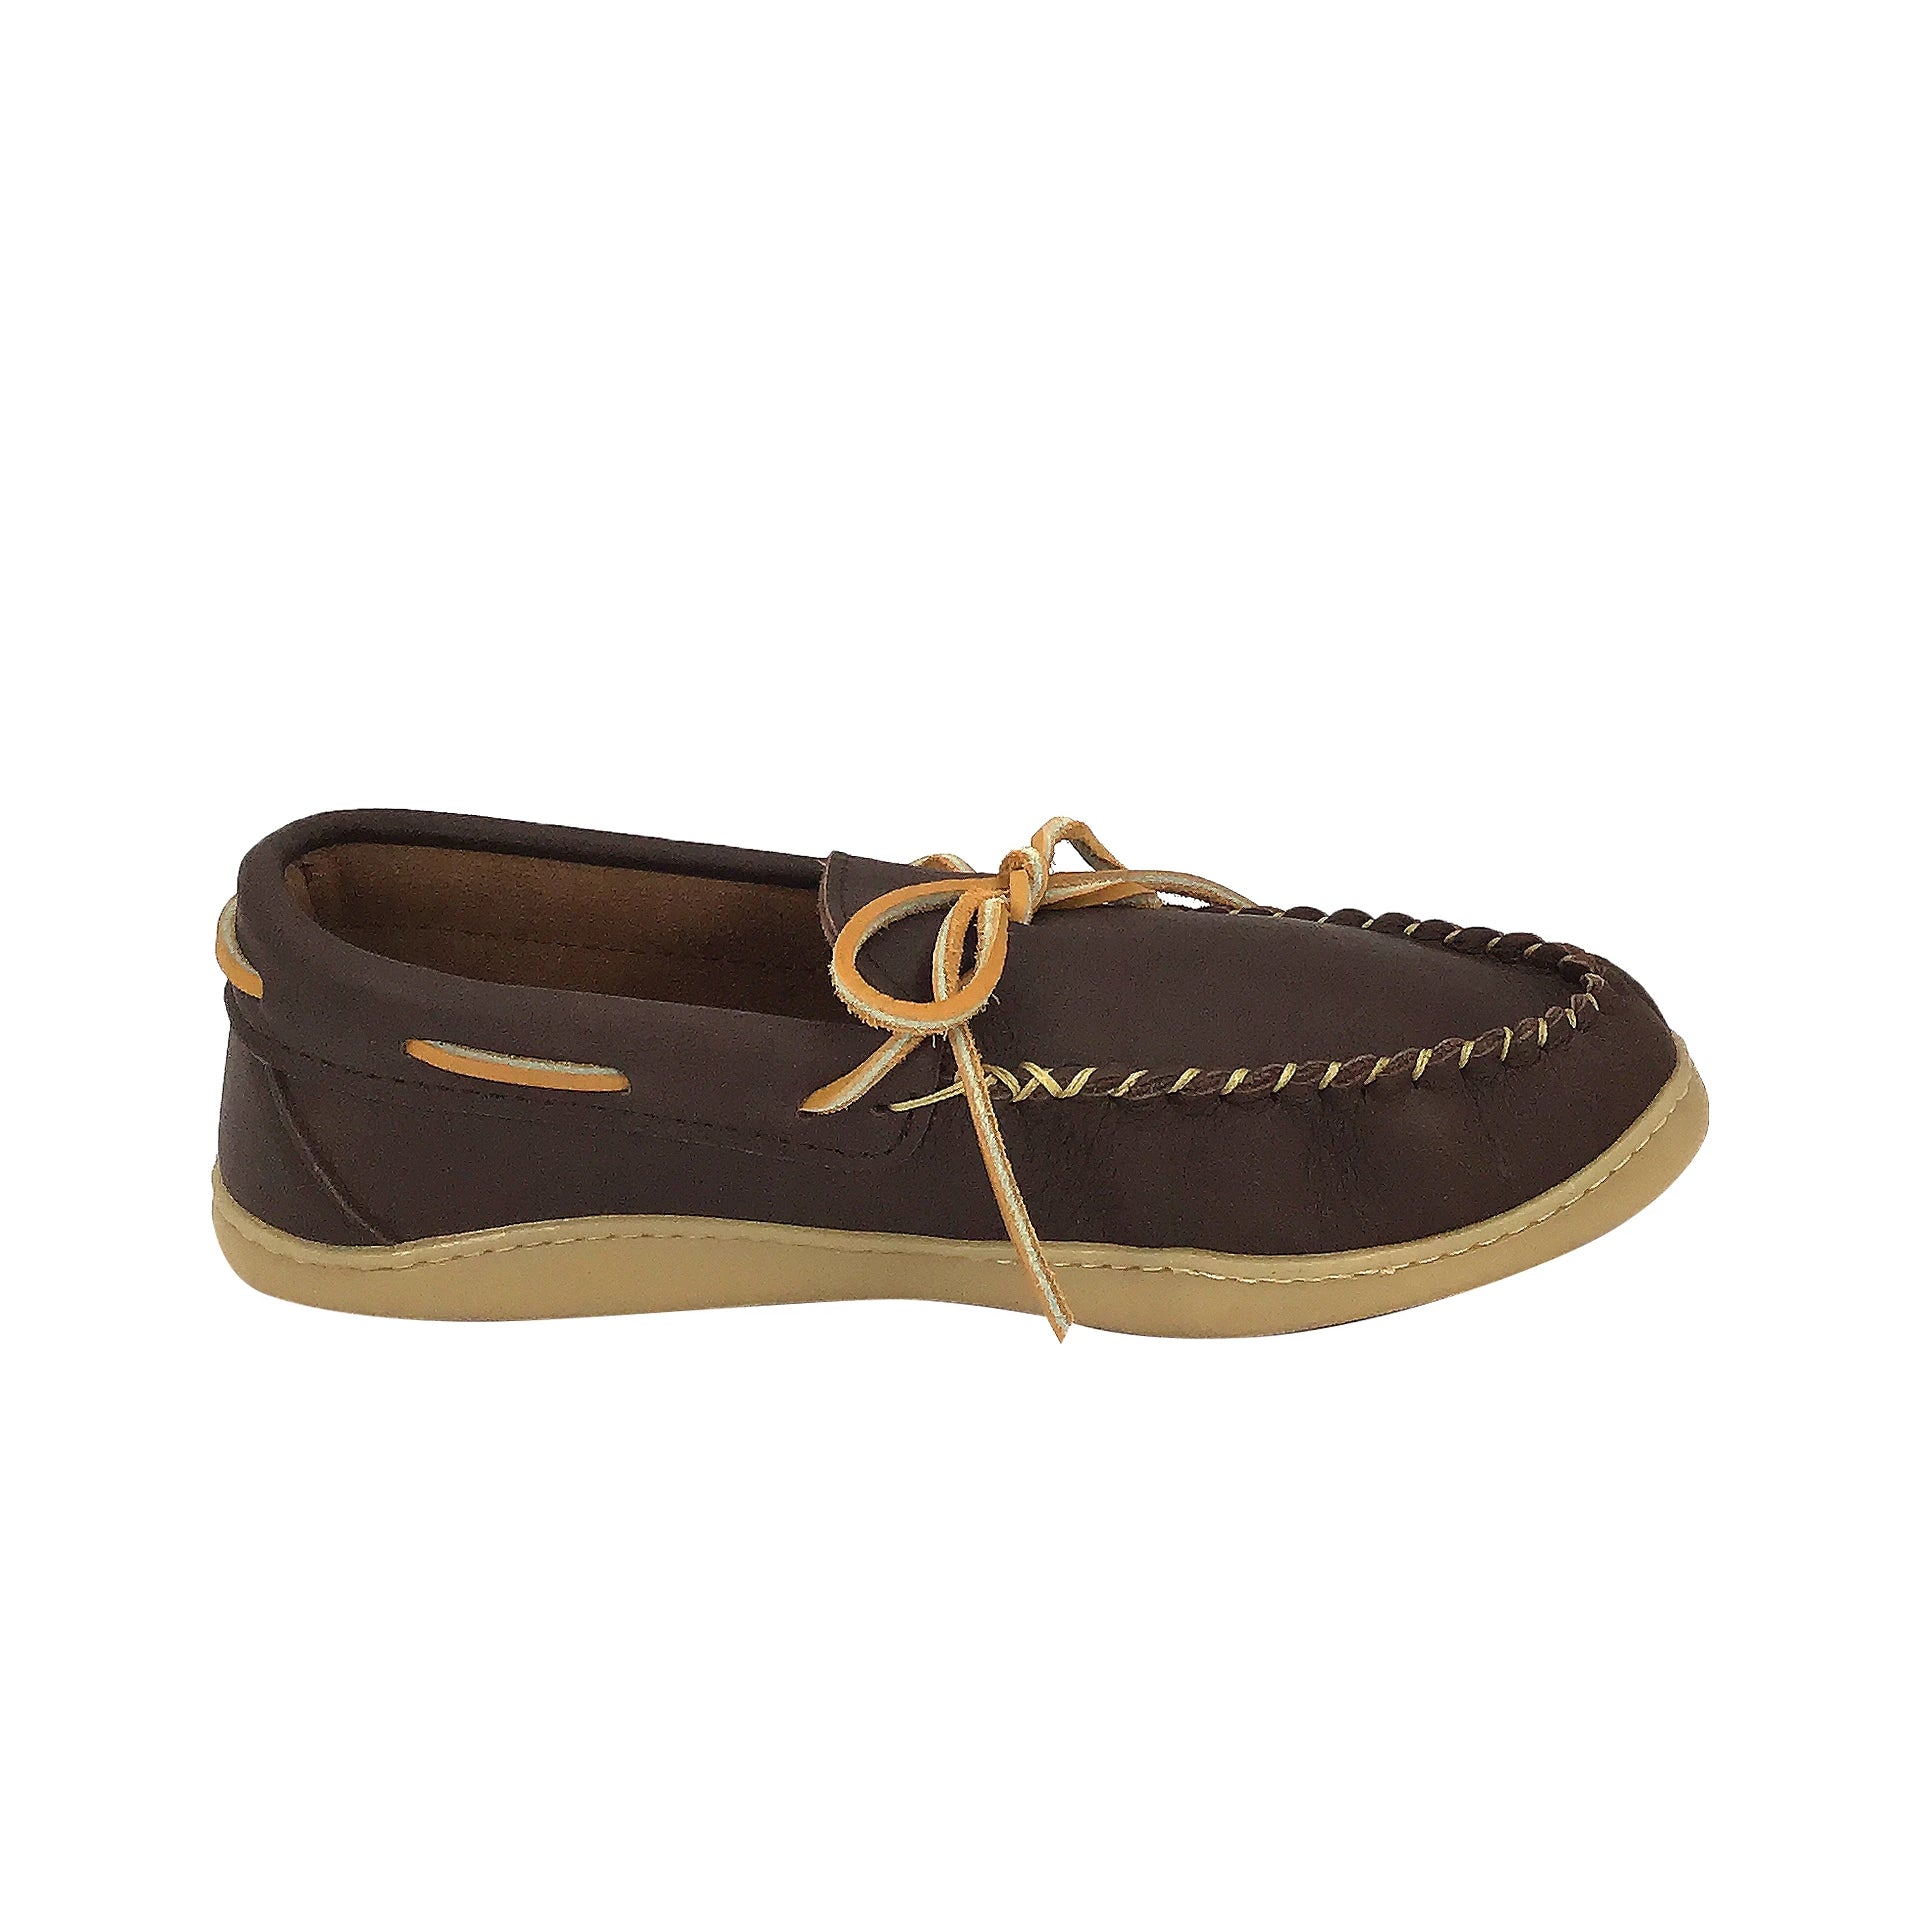 Men's Earthing Moccasin Shoes with Copper Rivet Rubber Sole